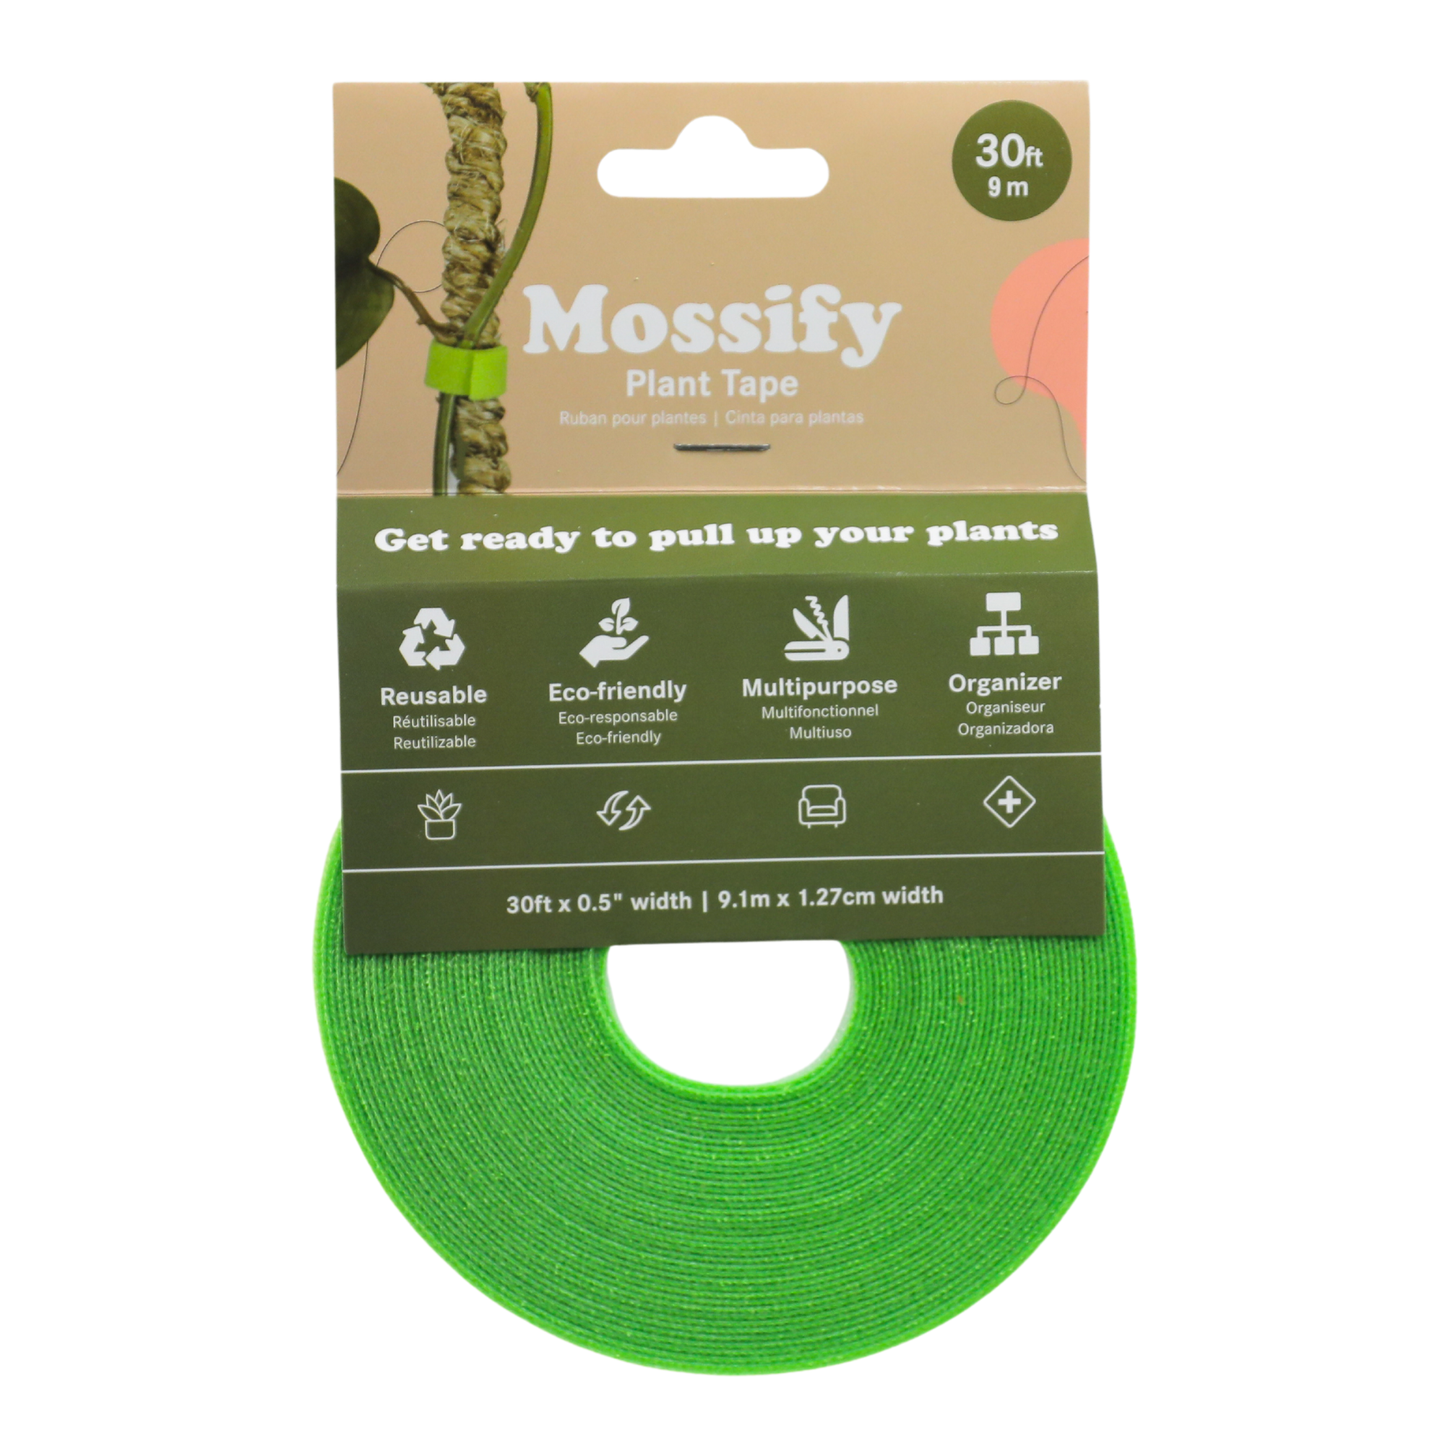 Mossify Plant Tape - Pull Your Plants Up - Reusable Plant Tape